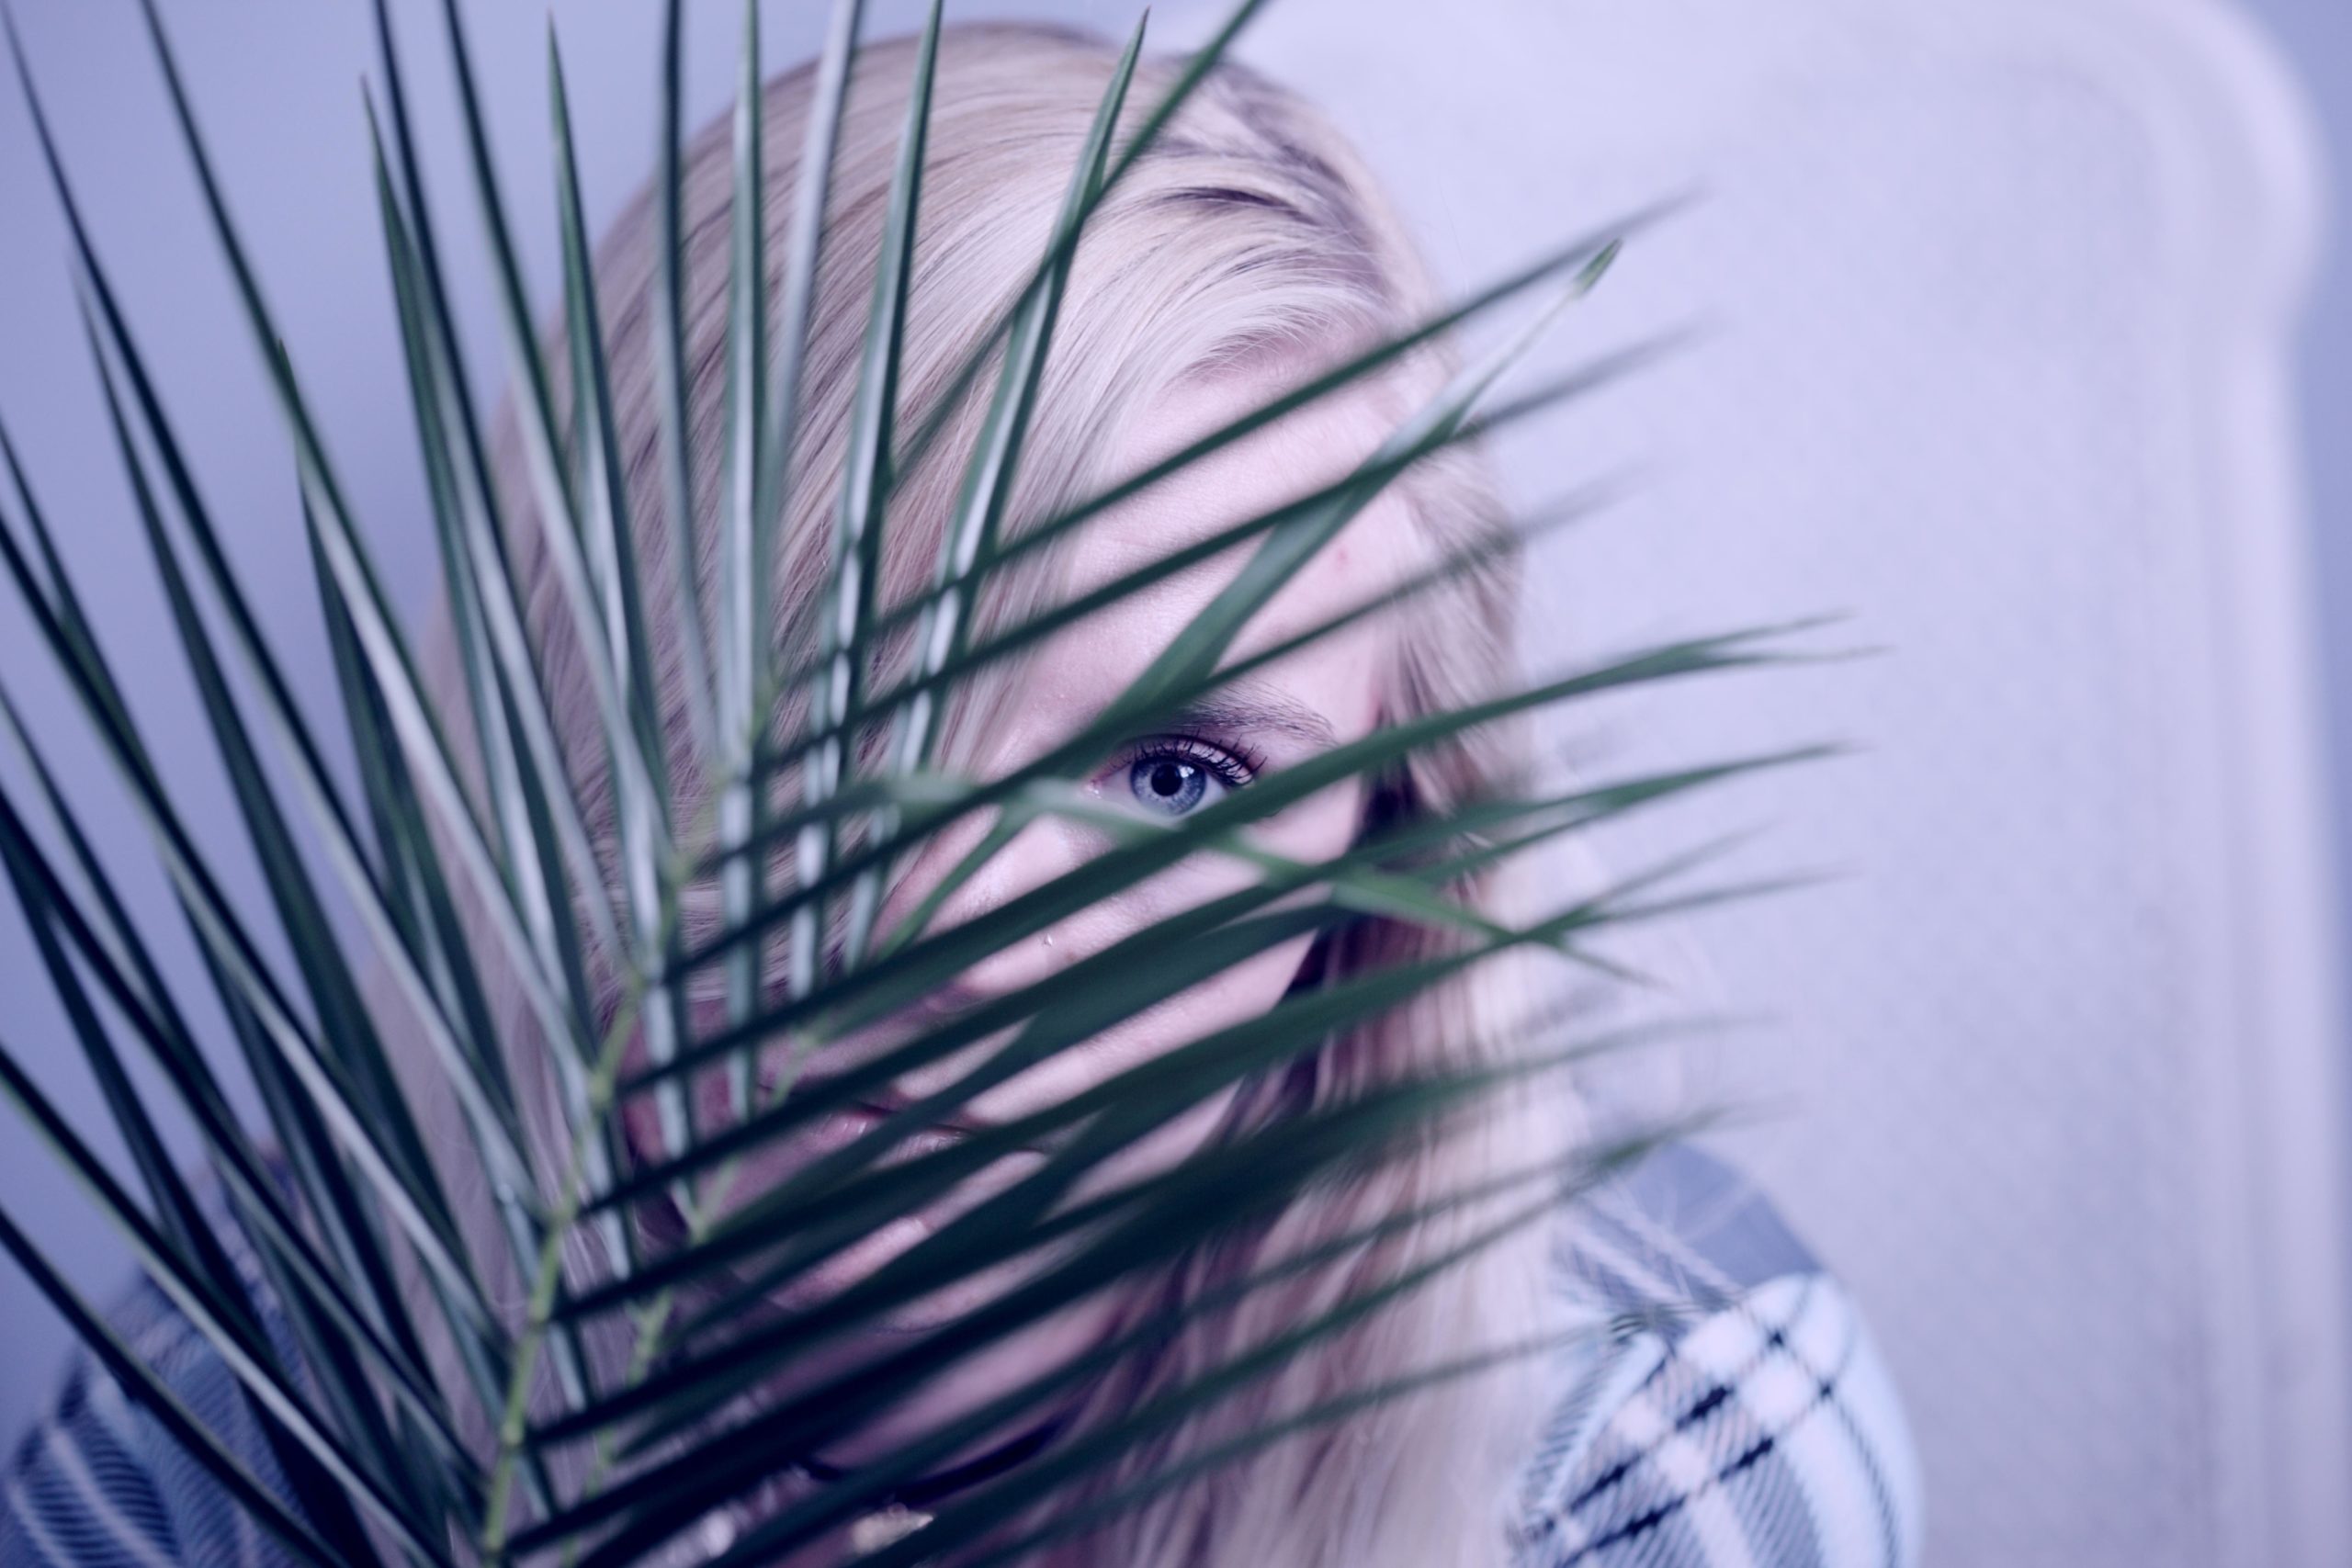 shy woman hiding behind palm frond